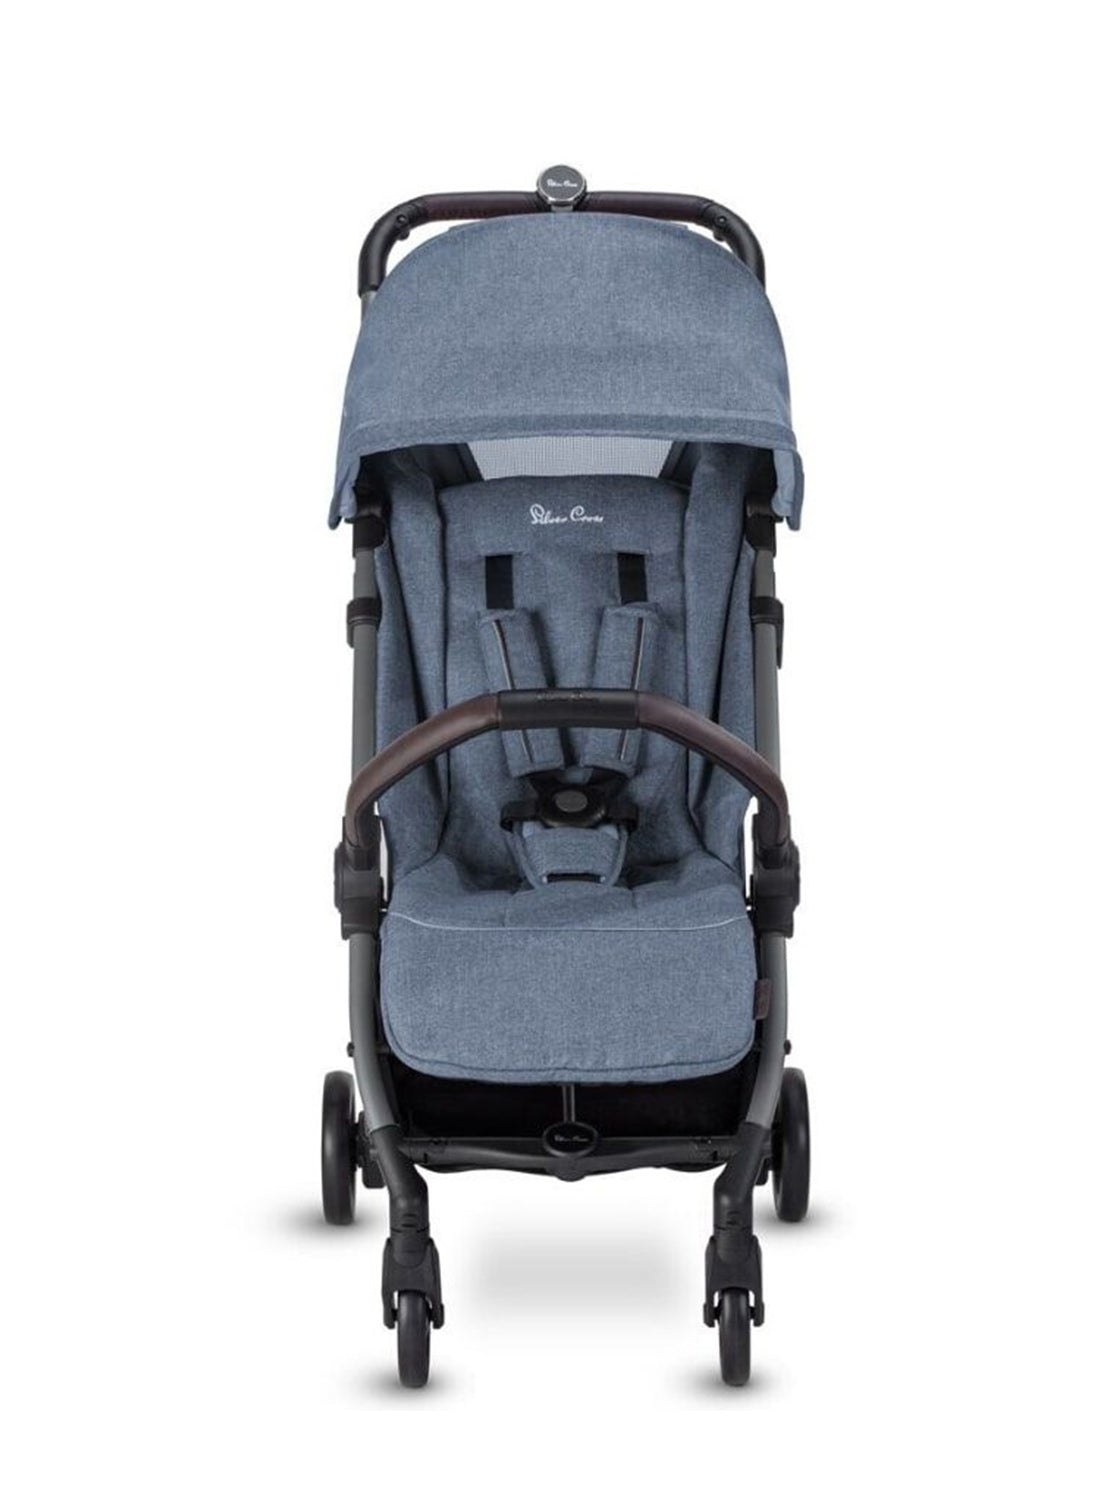 SILVER CROSS Jet Super Compact Stroller Special Edition